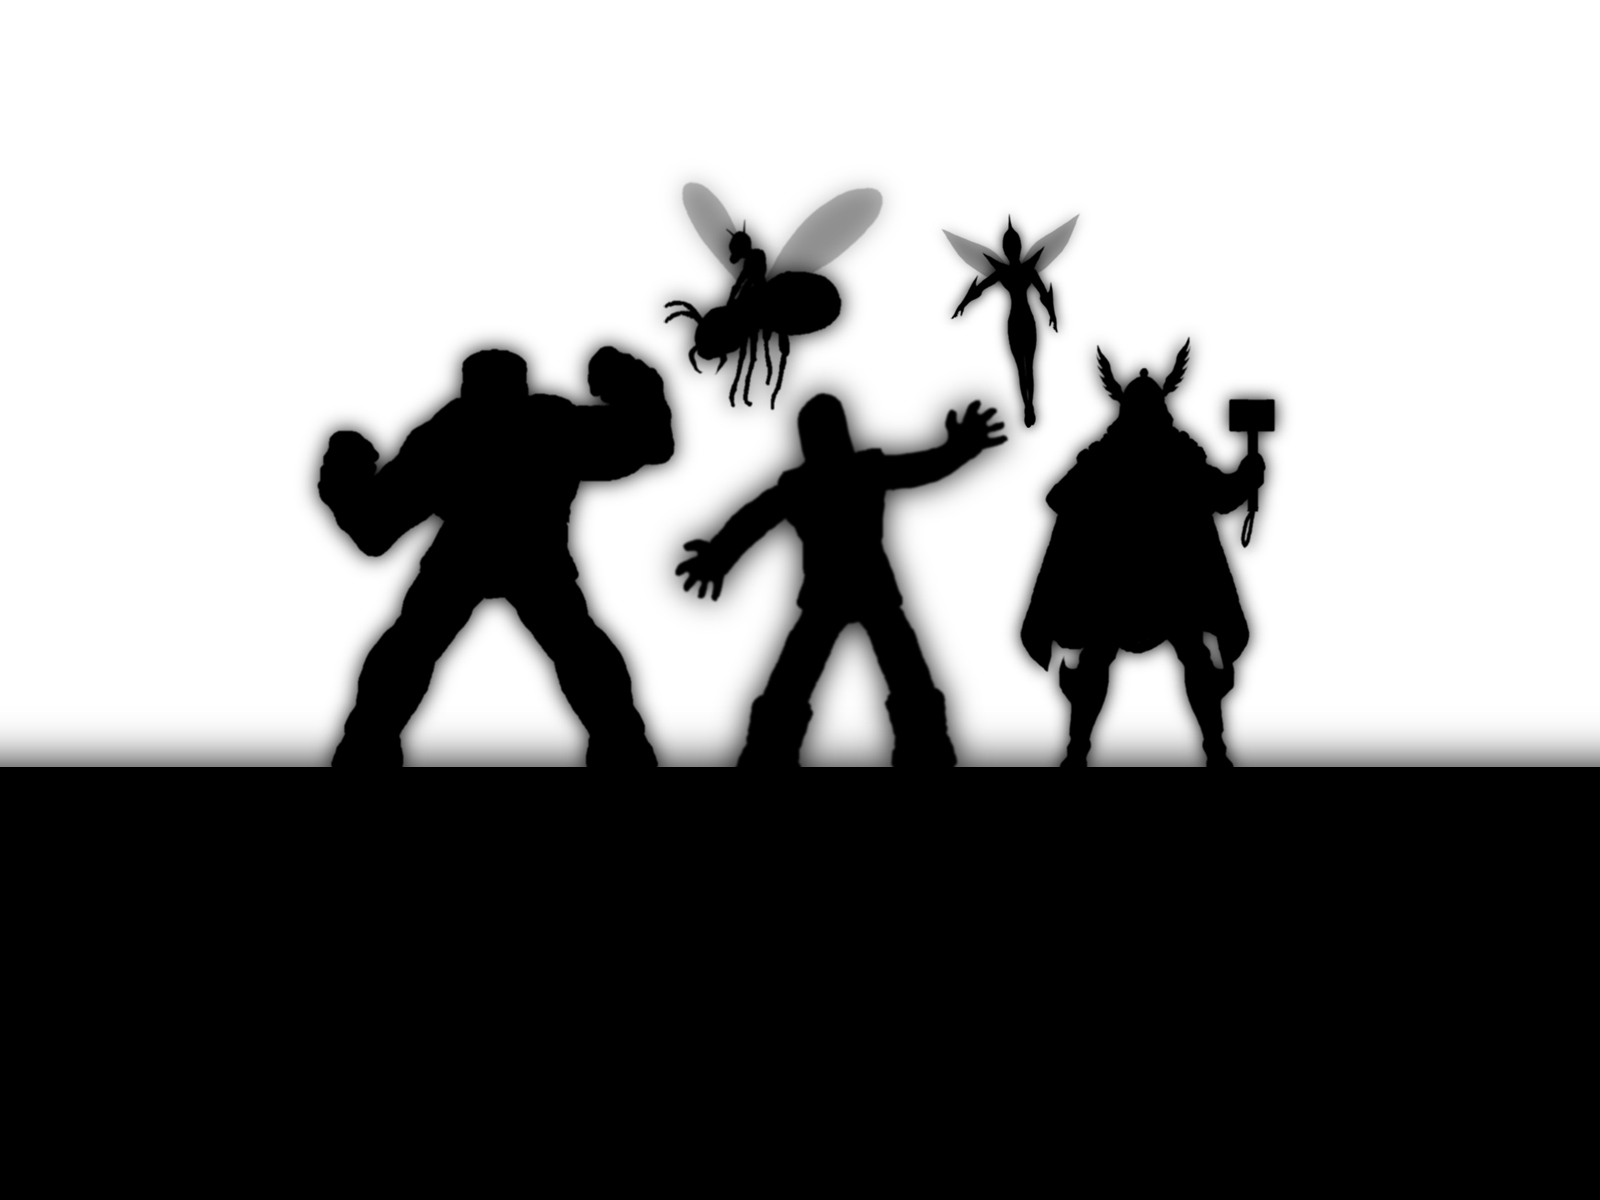 General 1600x1200 The Avengers silhouette monochrome Hulk Thor Ant-Man The Wasp simple background